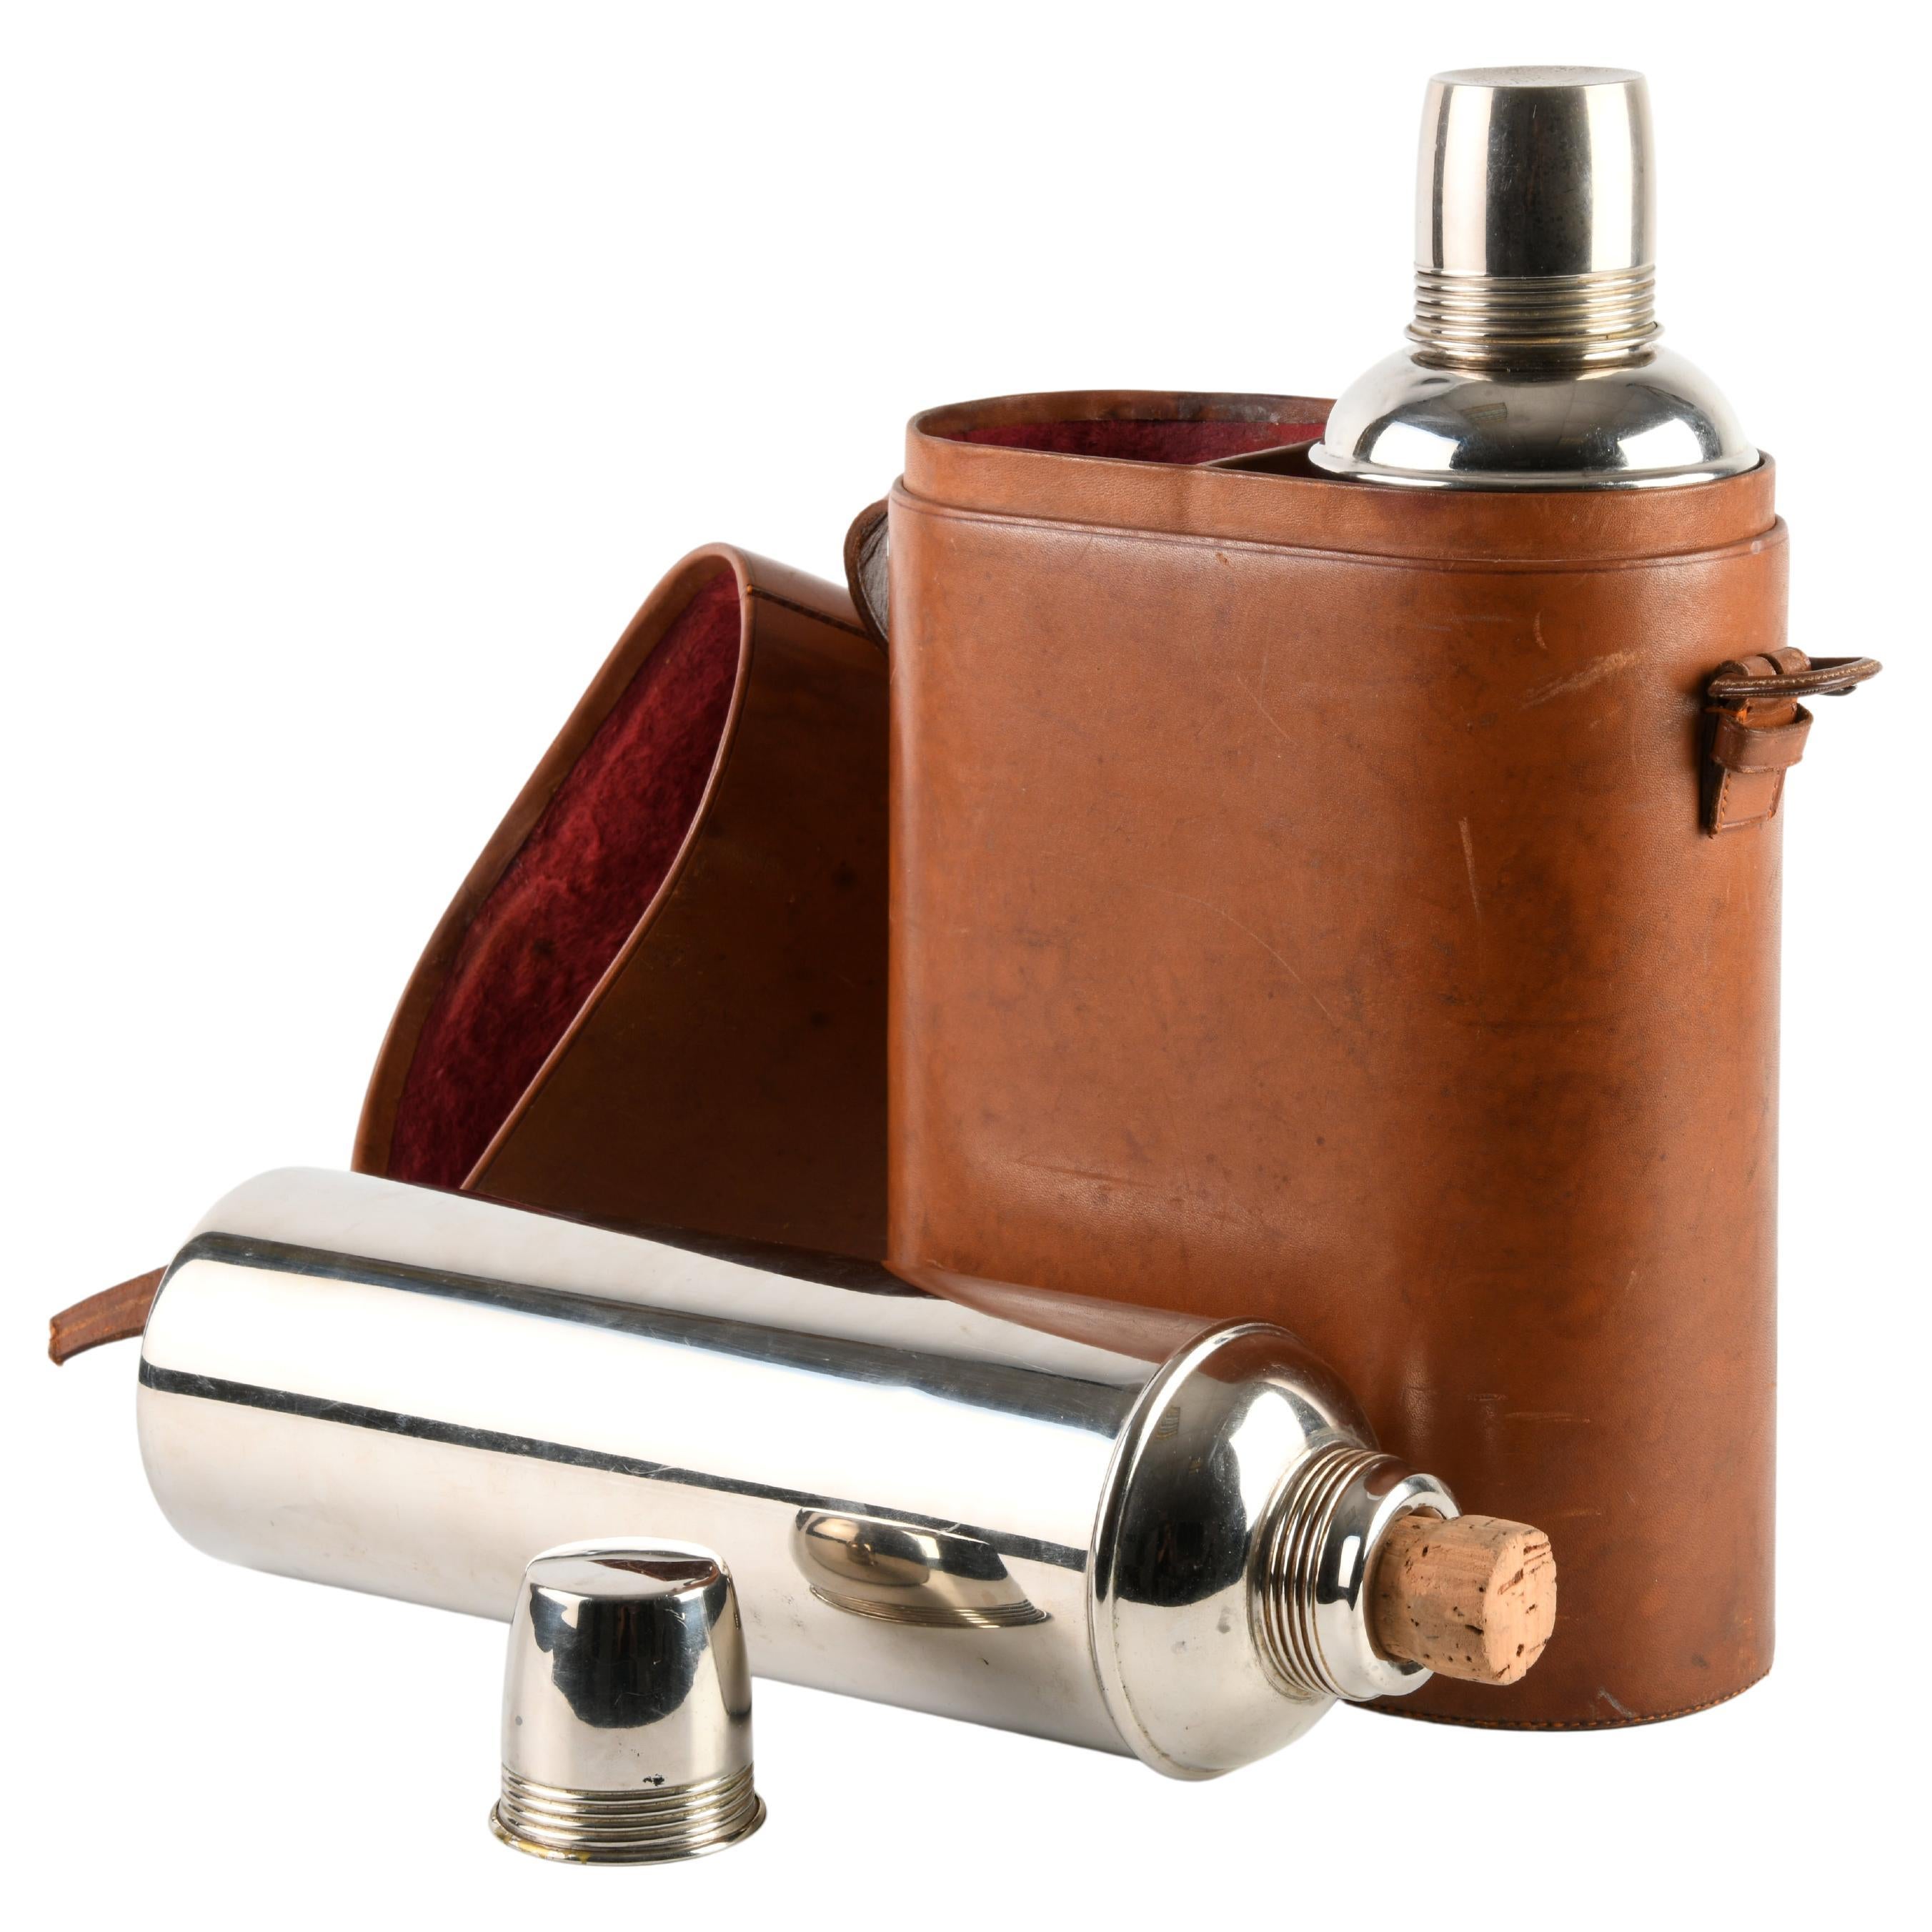 https://a.1stdibscdn.com/set-of-two-chrome-plated-steel-thermos-flasks-in-a-velvet-lined-leather-case-for-sale/f_75772/f_359590921693487623750/f_35959092_1693487625251_bg_processed.jpg